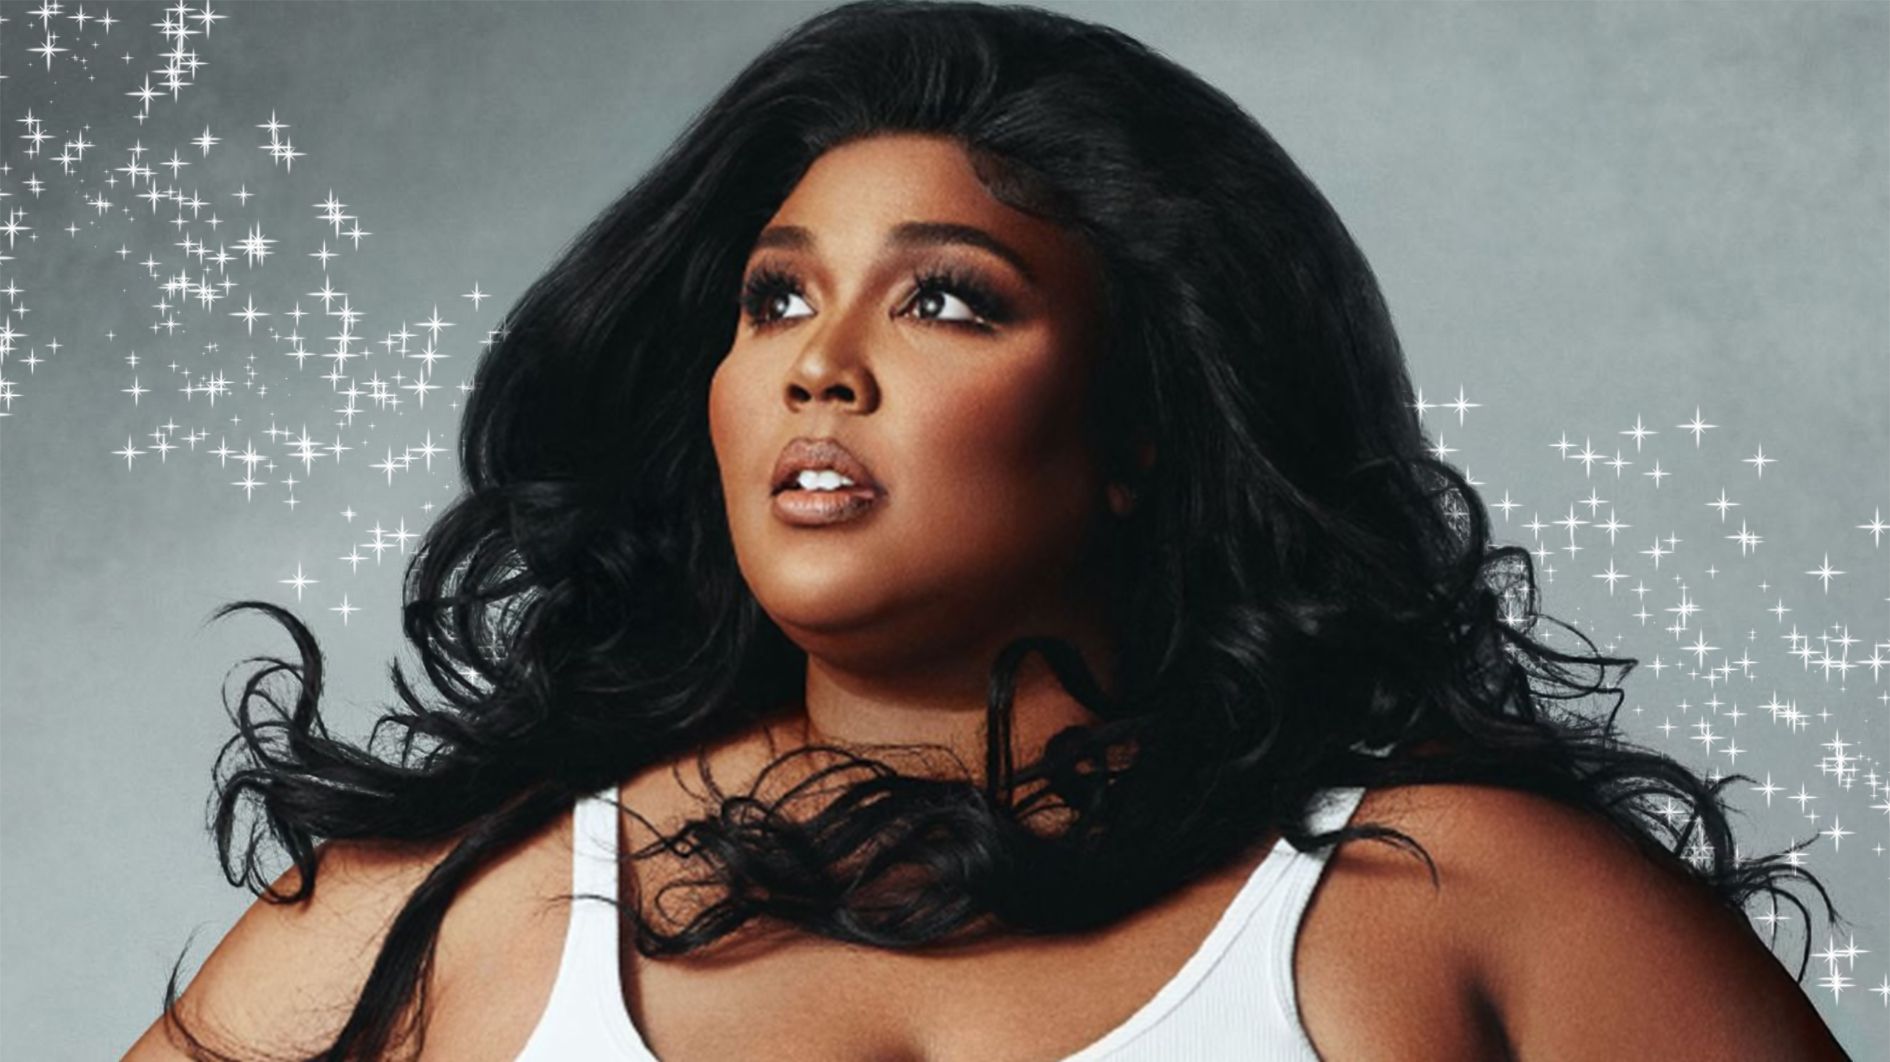 Lizzo: Get to know the '2 Be Loved' singer